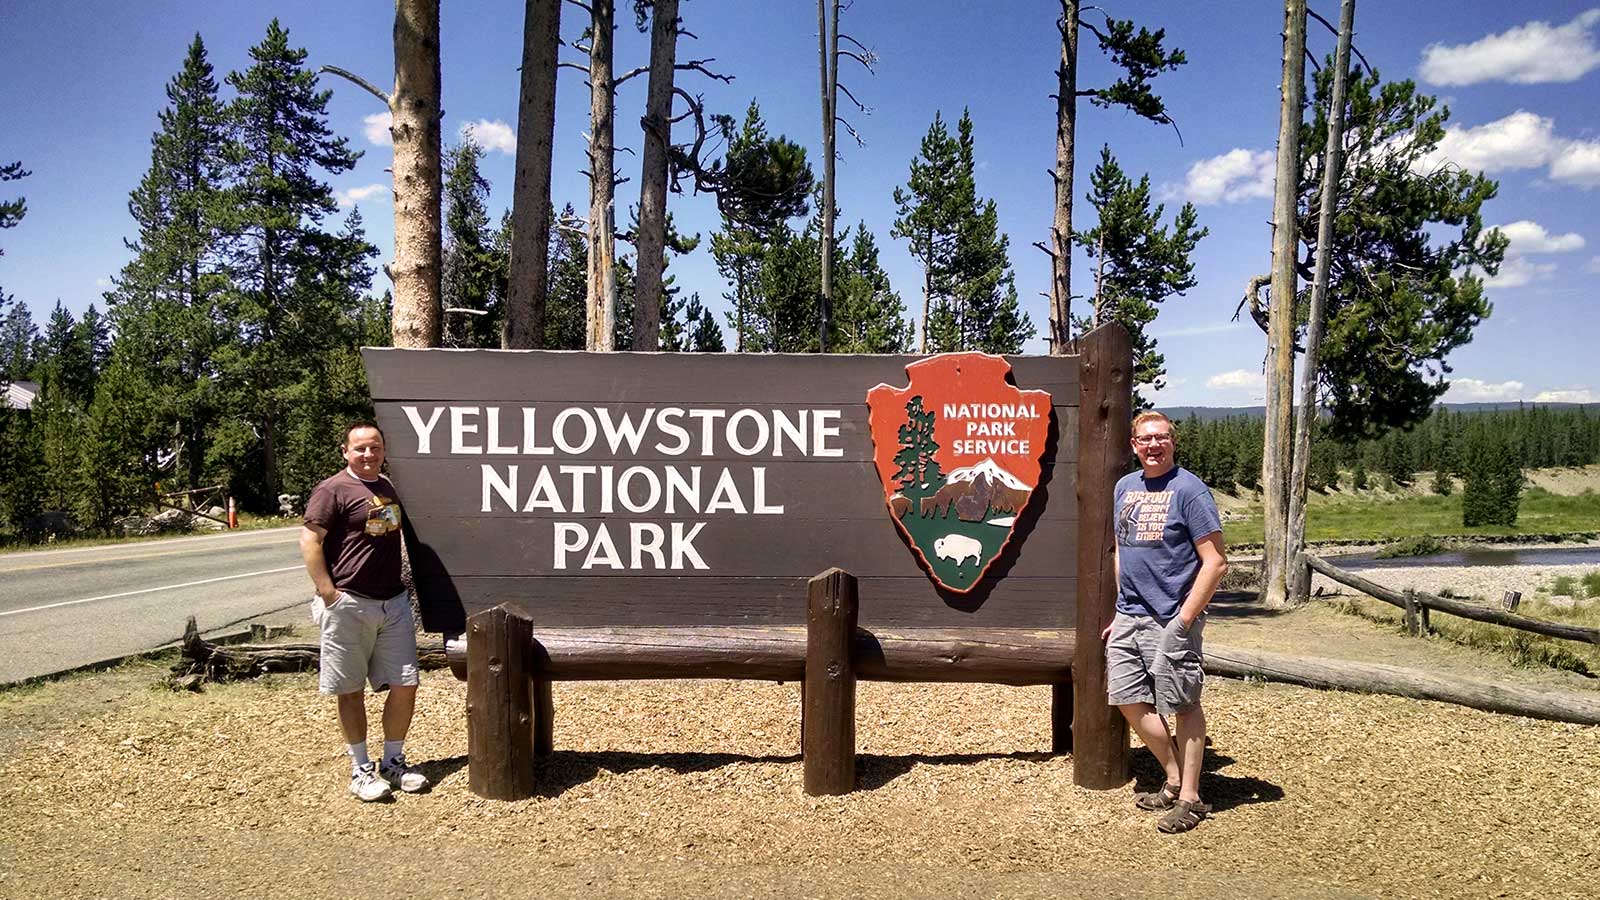 Roguetrippers visit Yellowstone National Park